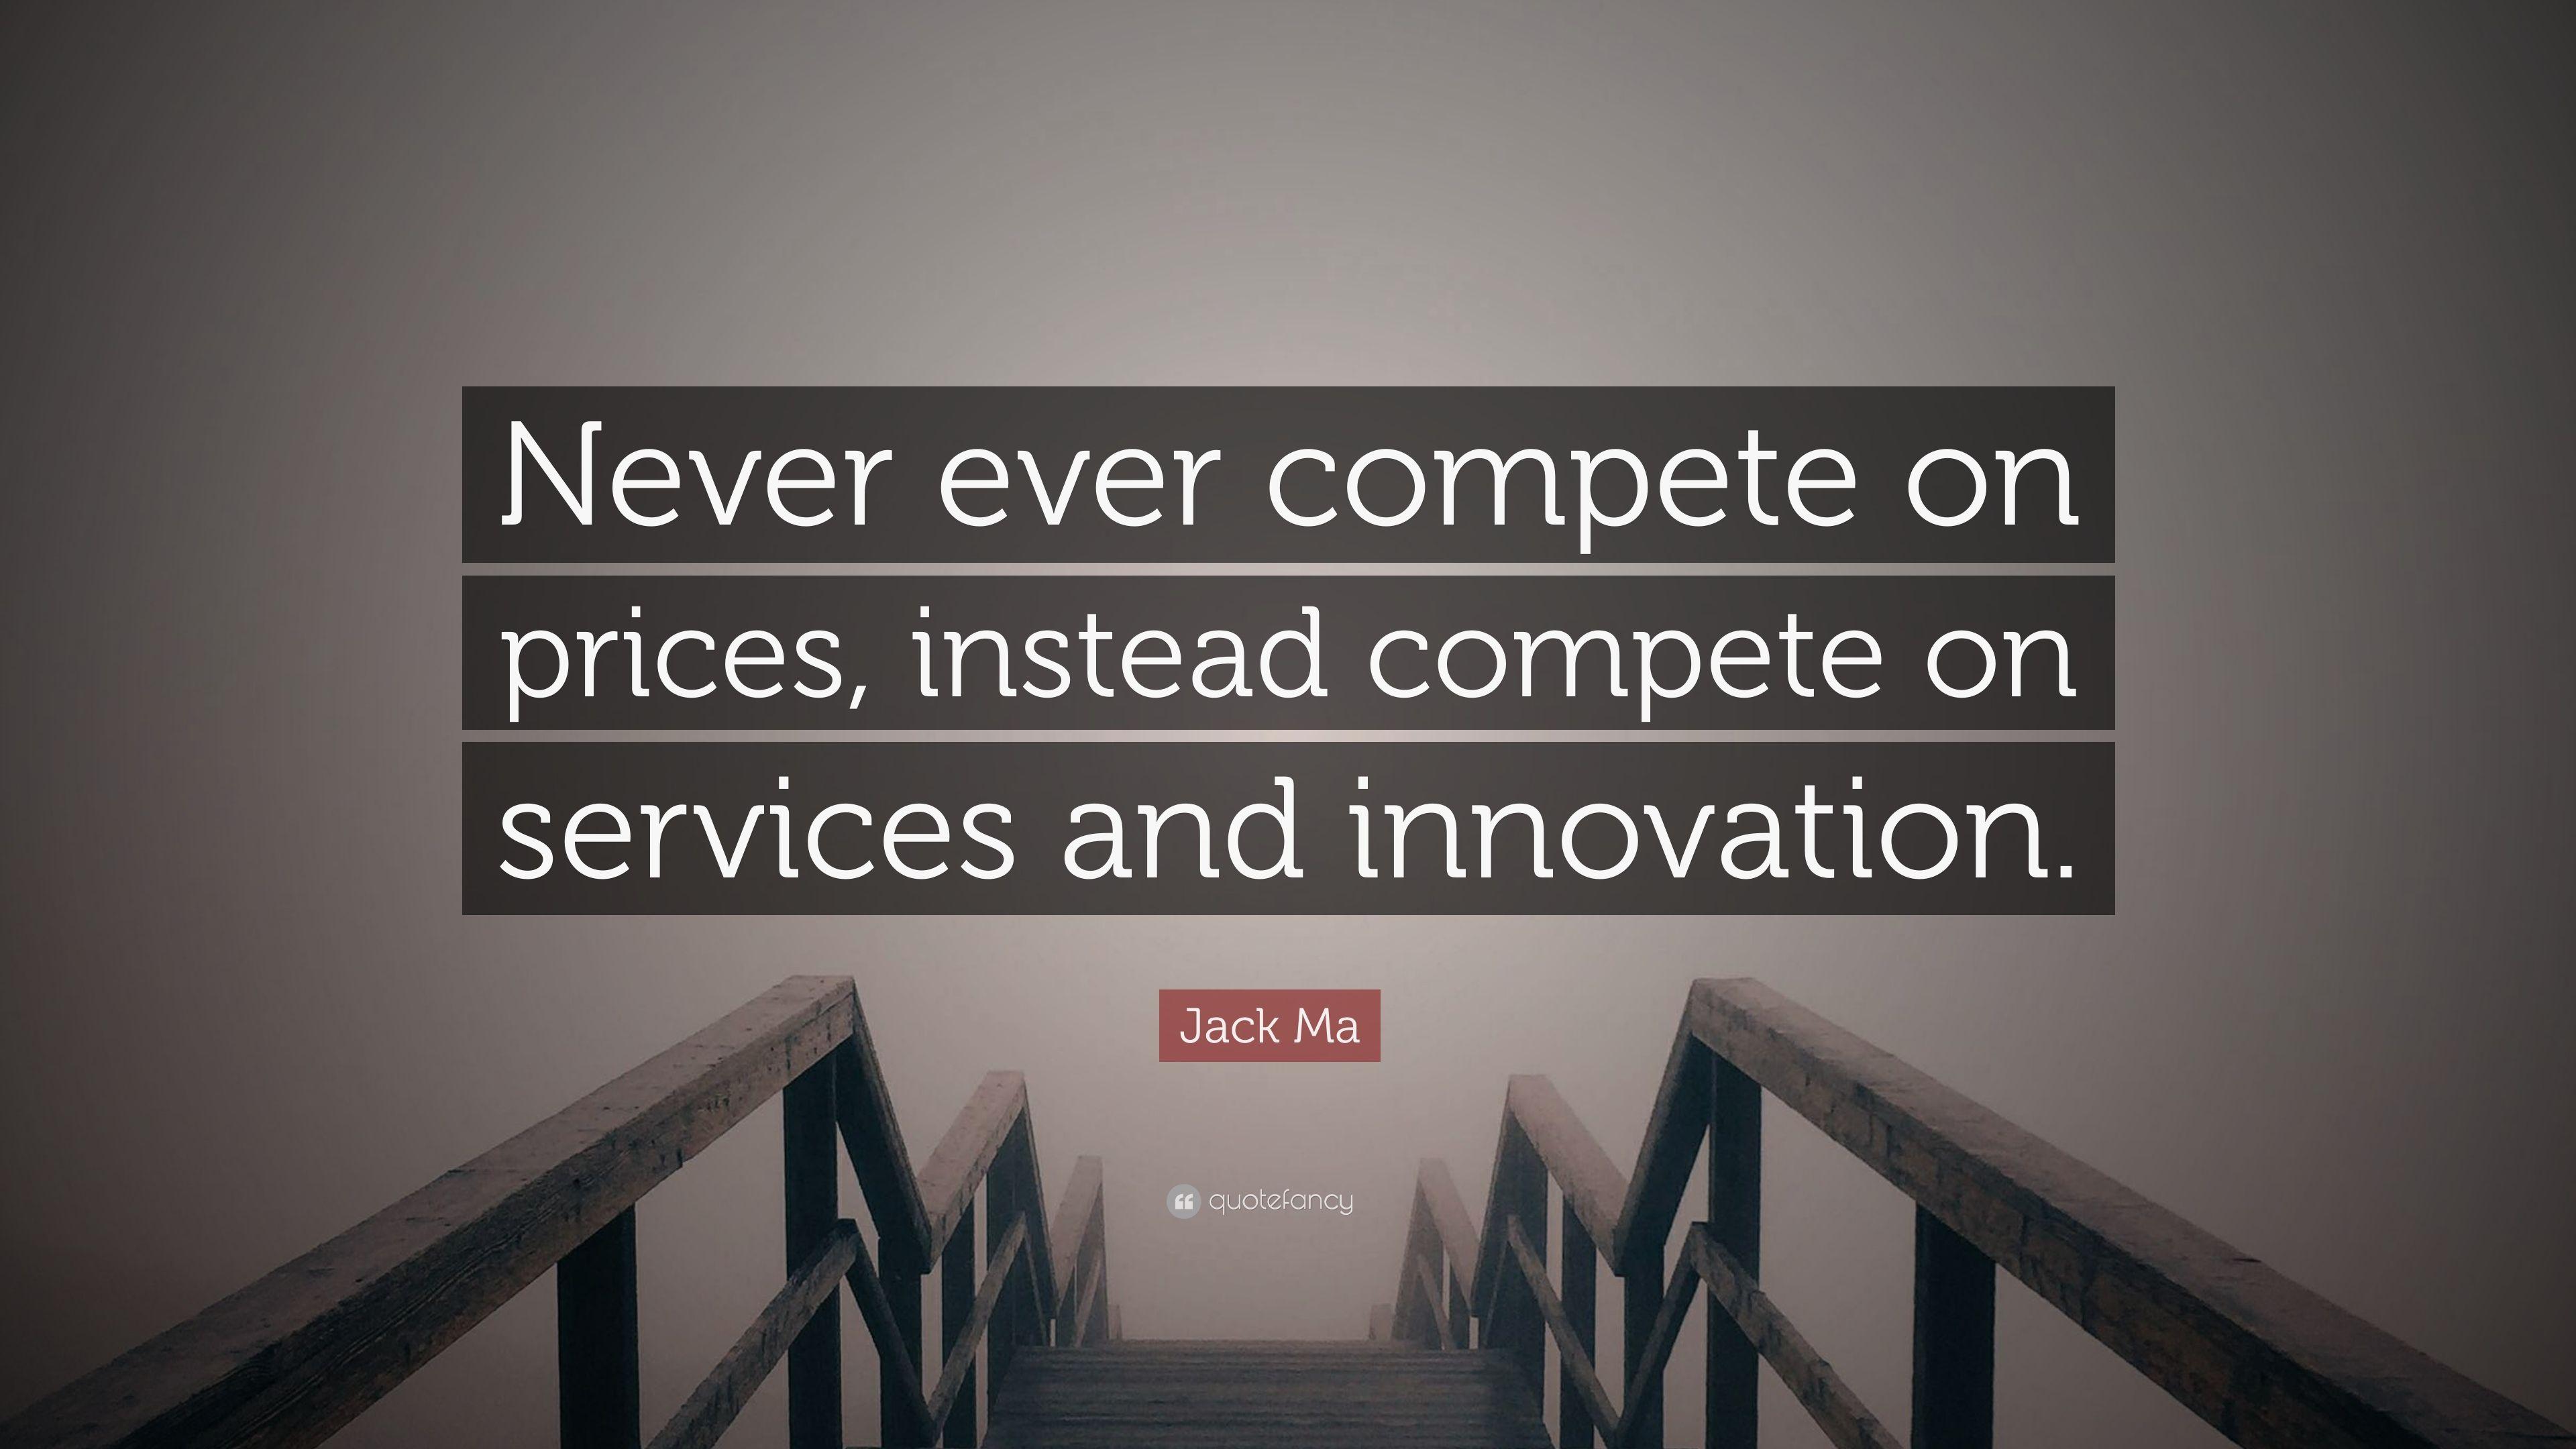 Jack Ma Quote: “Never ever compete on prices, instead compete